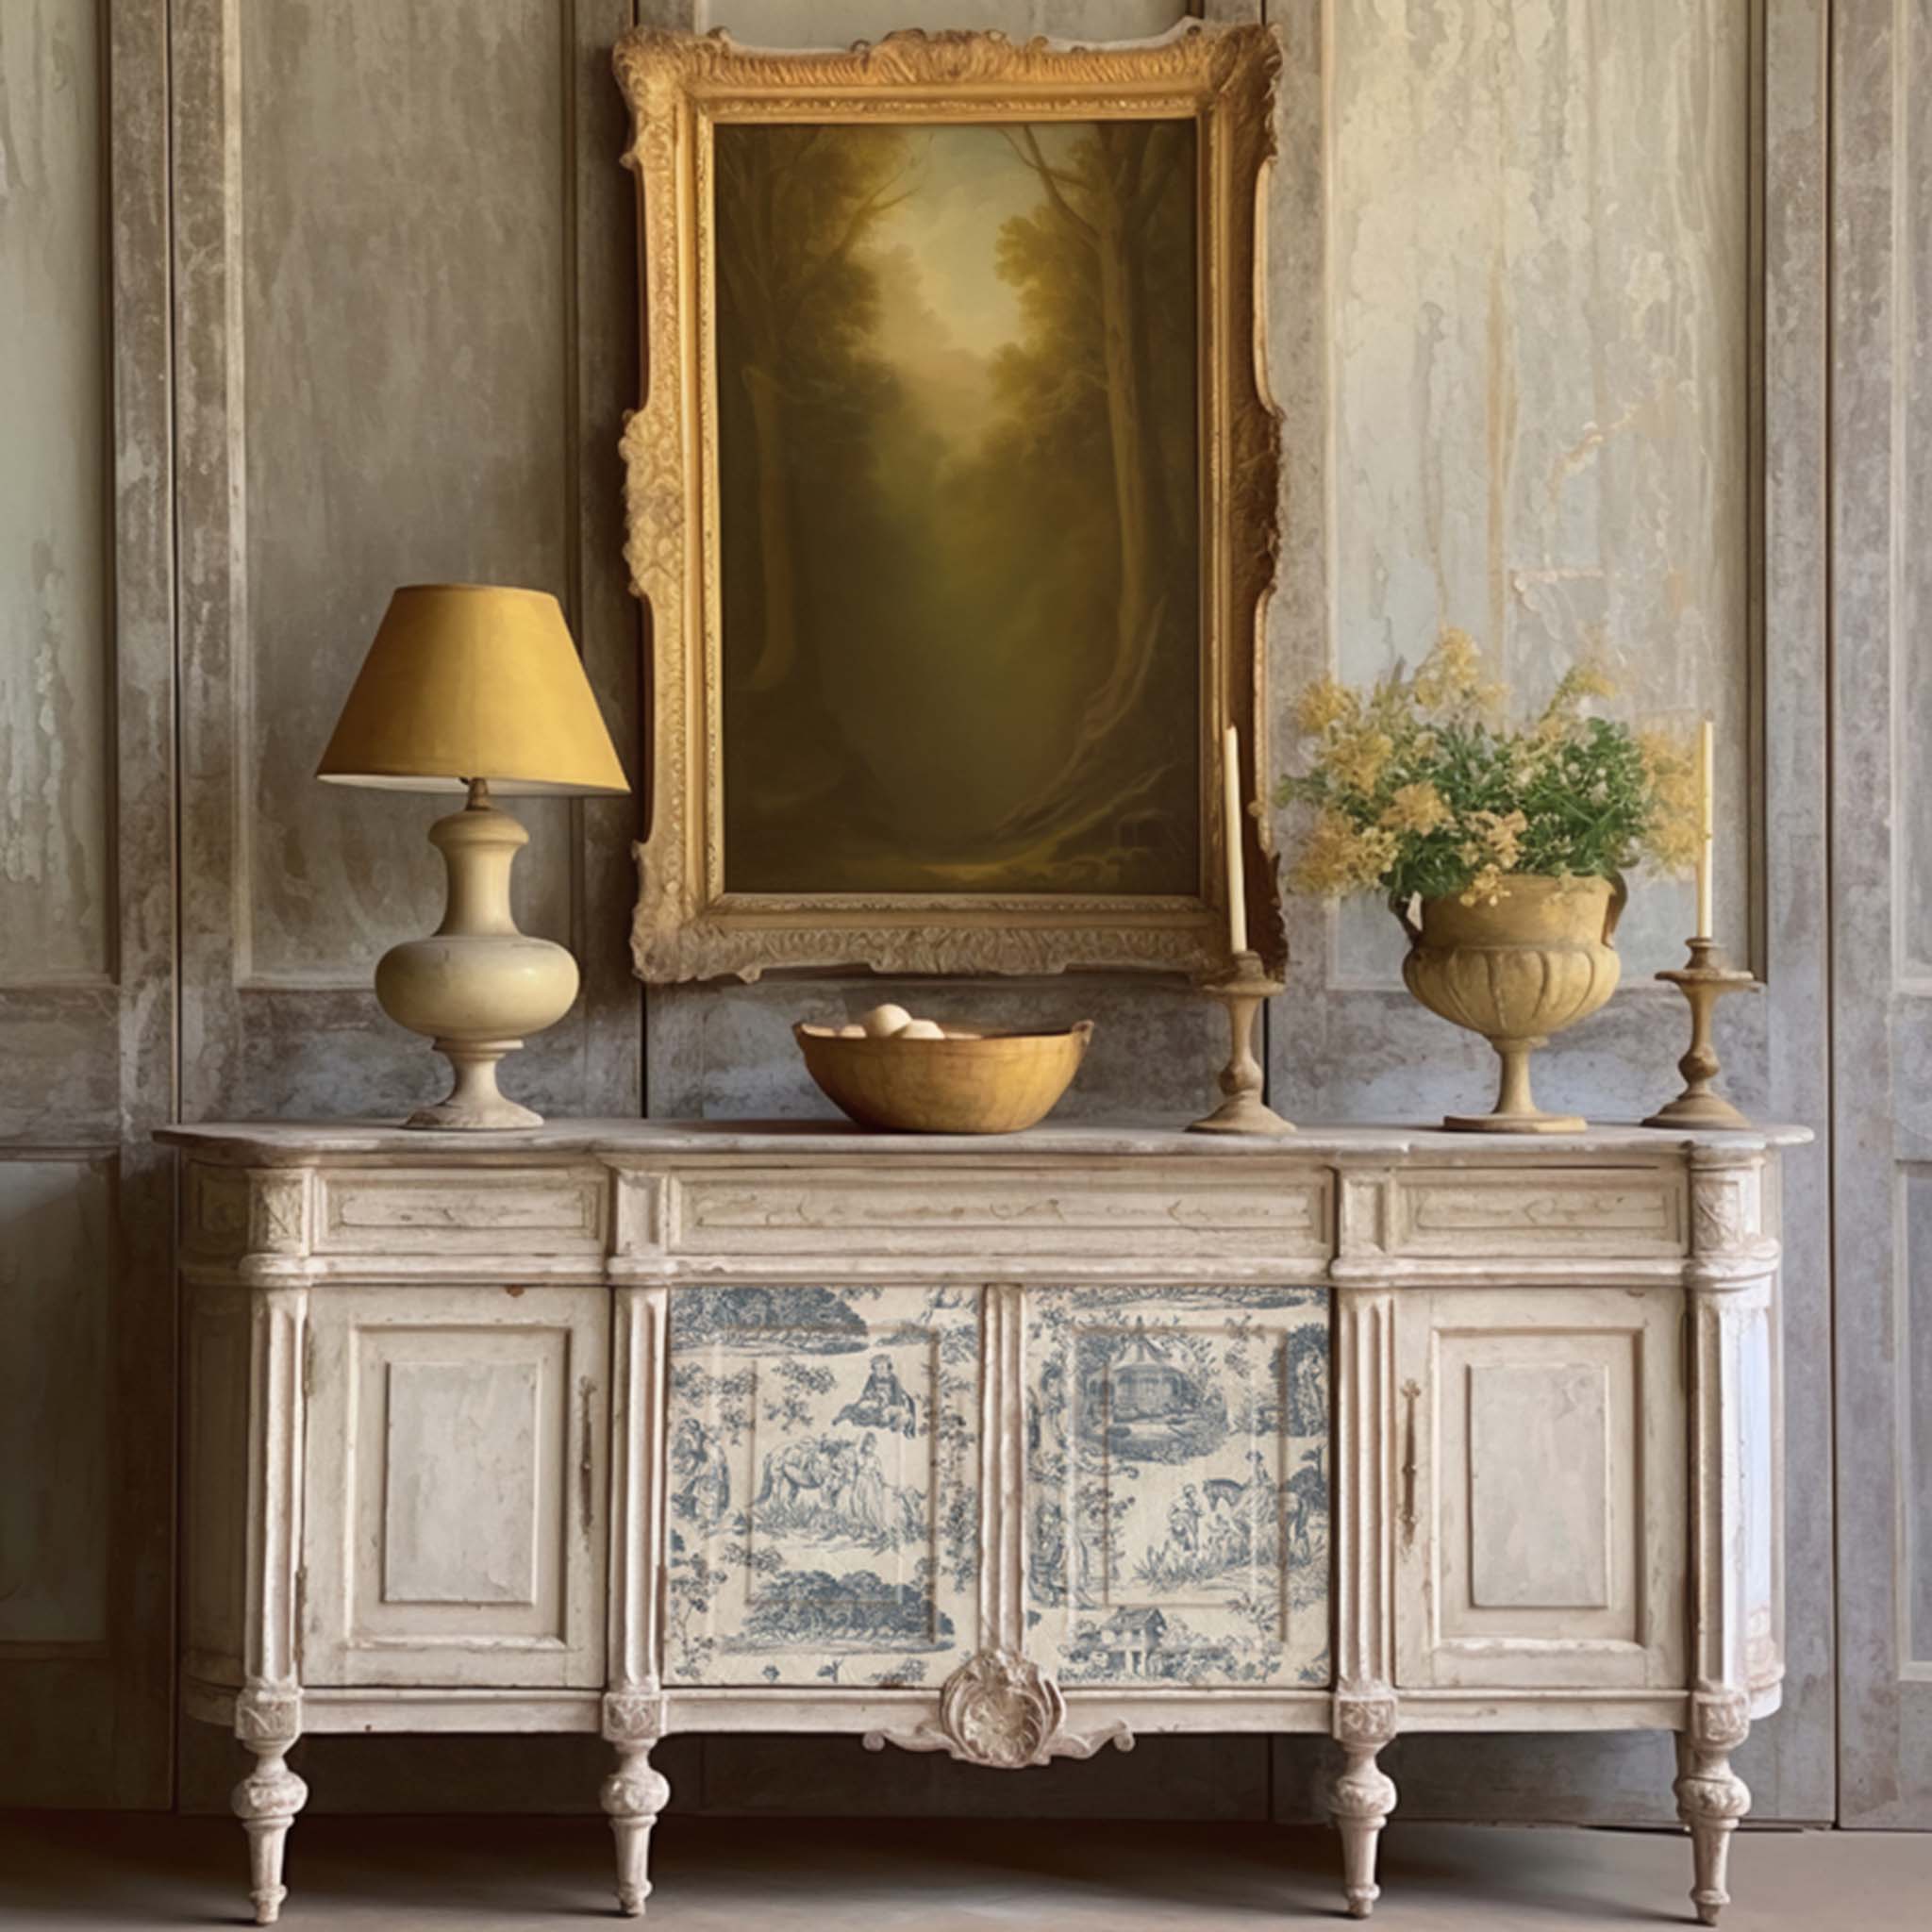 A vintage buffet table is painted in off-white and features ReDesign with Prima's Toile de Jouy A1 fiber paper by Kacha on its 2 center drawers.